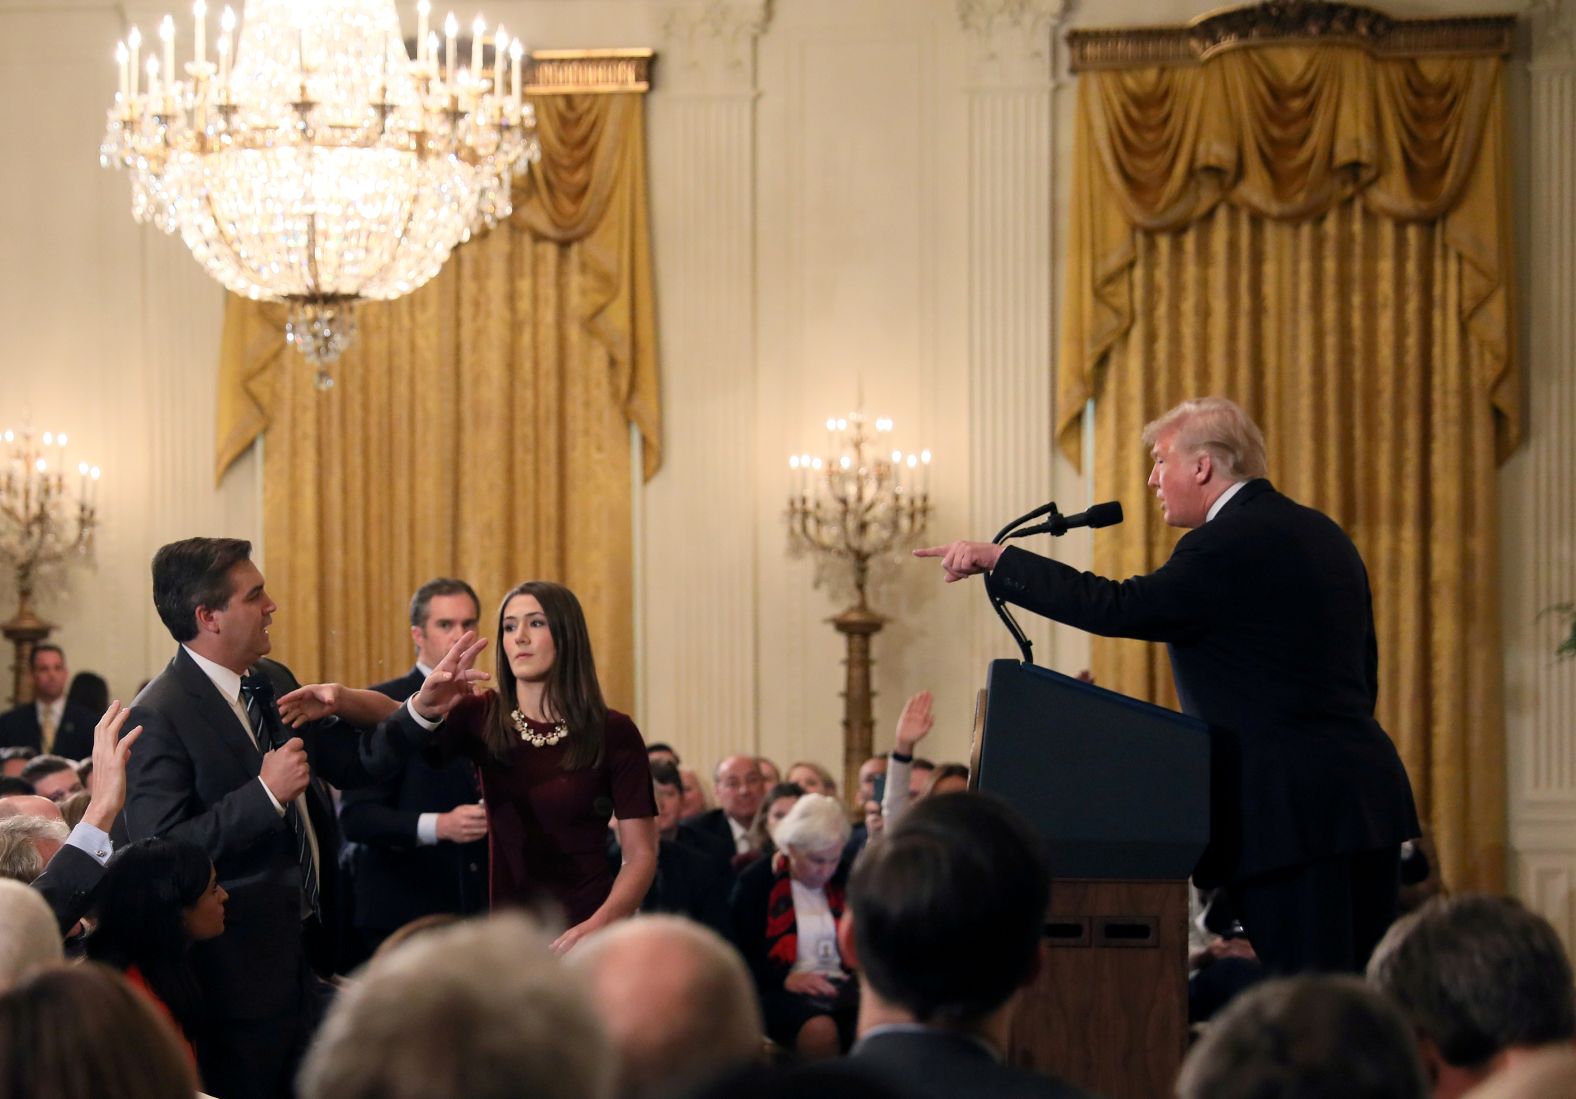 A White House staff member reaches for the microphone held by CNN's Jim Acosta as he questions Trump during a news conference in November 2018. Later that day, in a stunning break with protocol, the White House said that it was suspending Acosta's press pass "until further notice." A federal judge later ordered the White House to return Acosta's press pass.